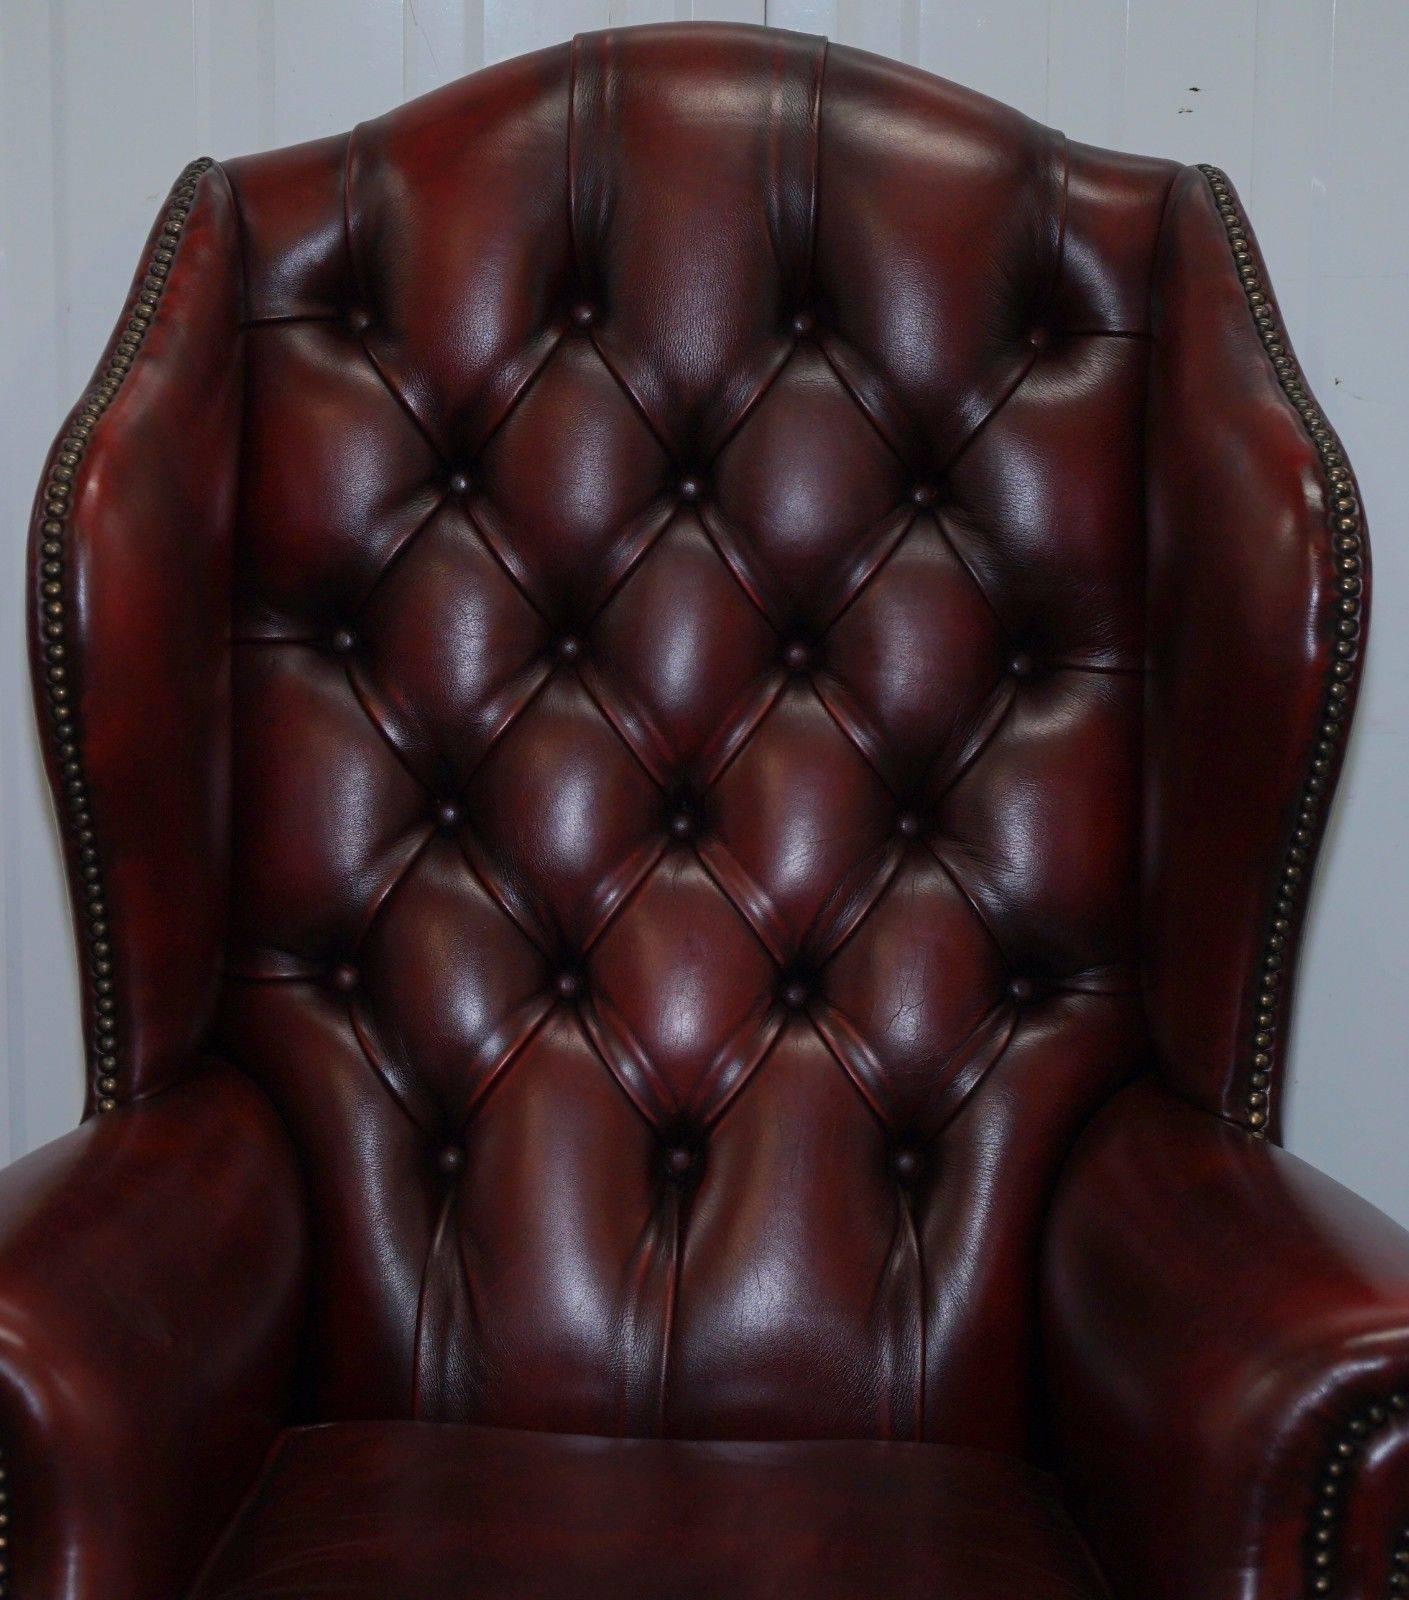 chesterfield chair oxblood